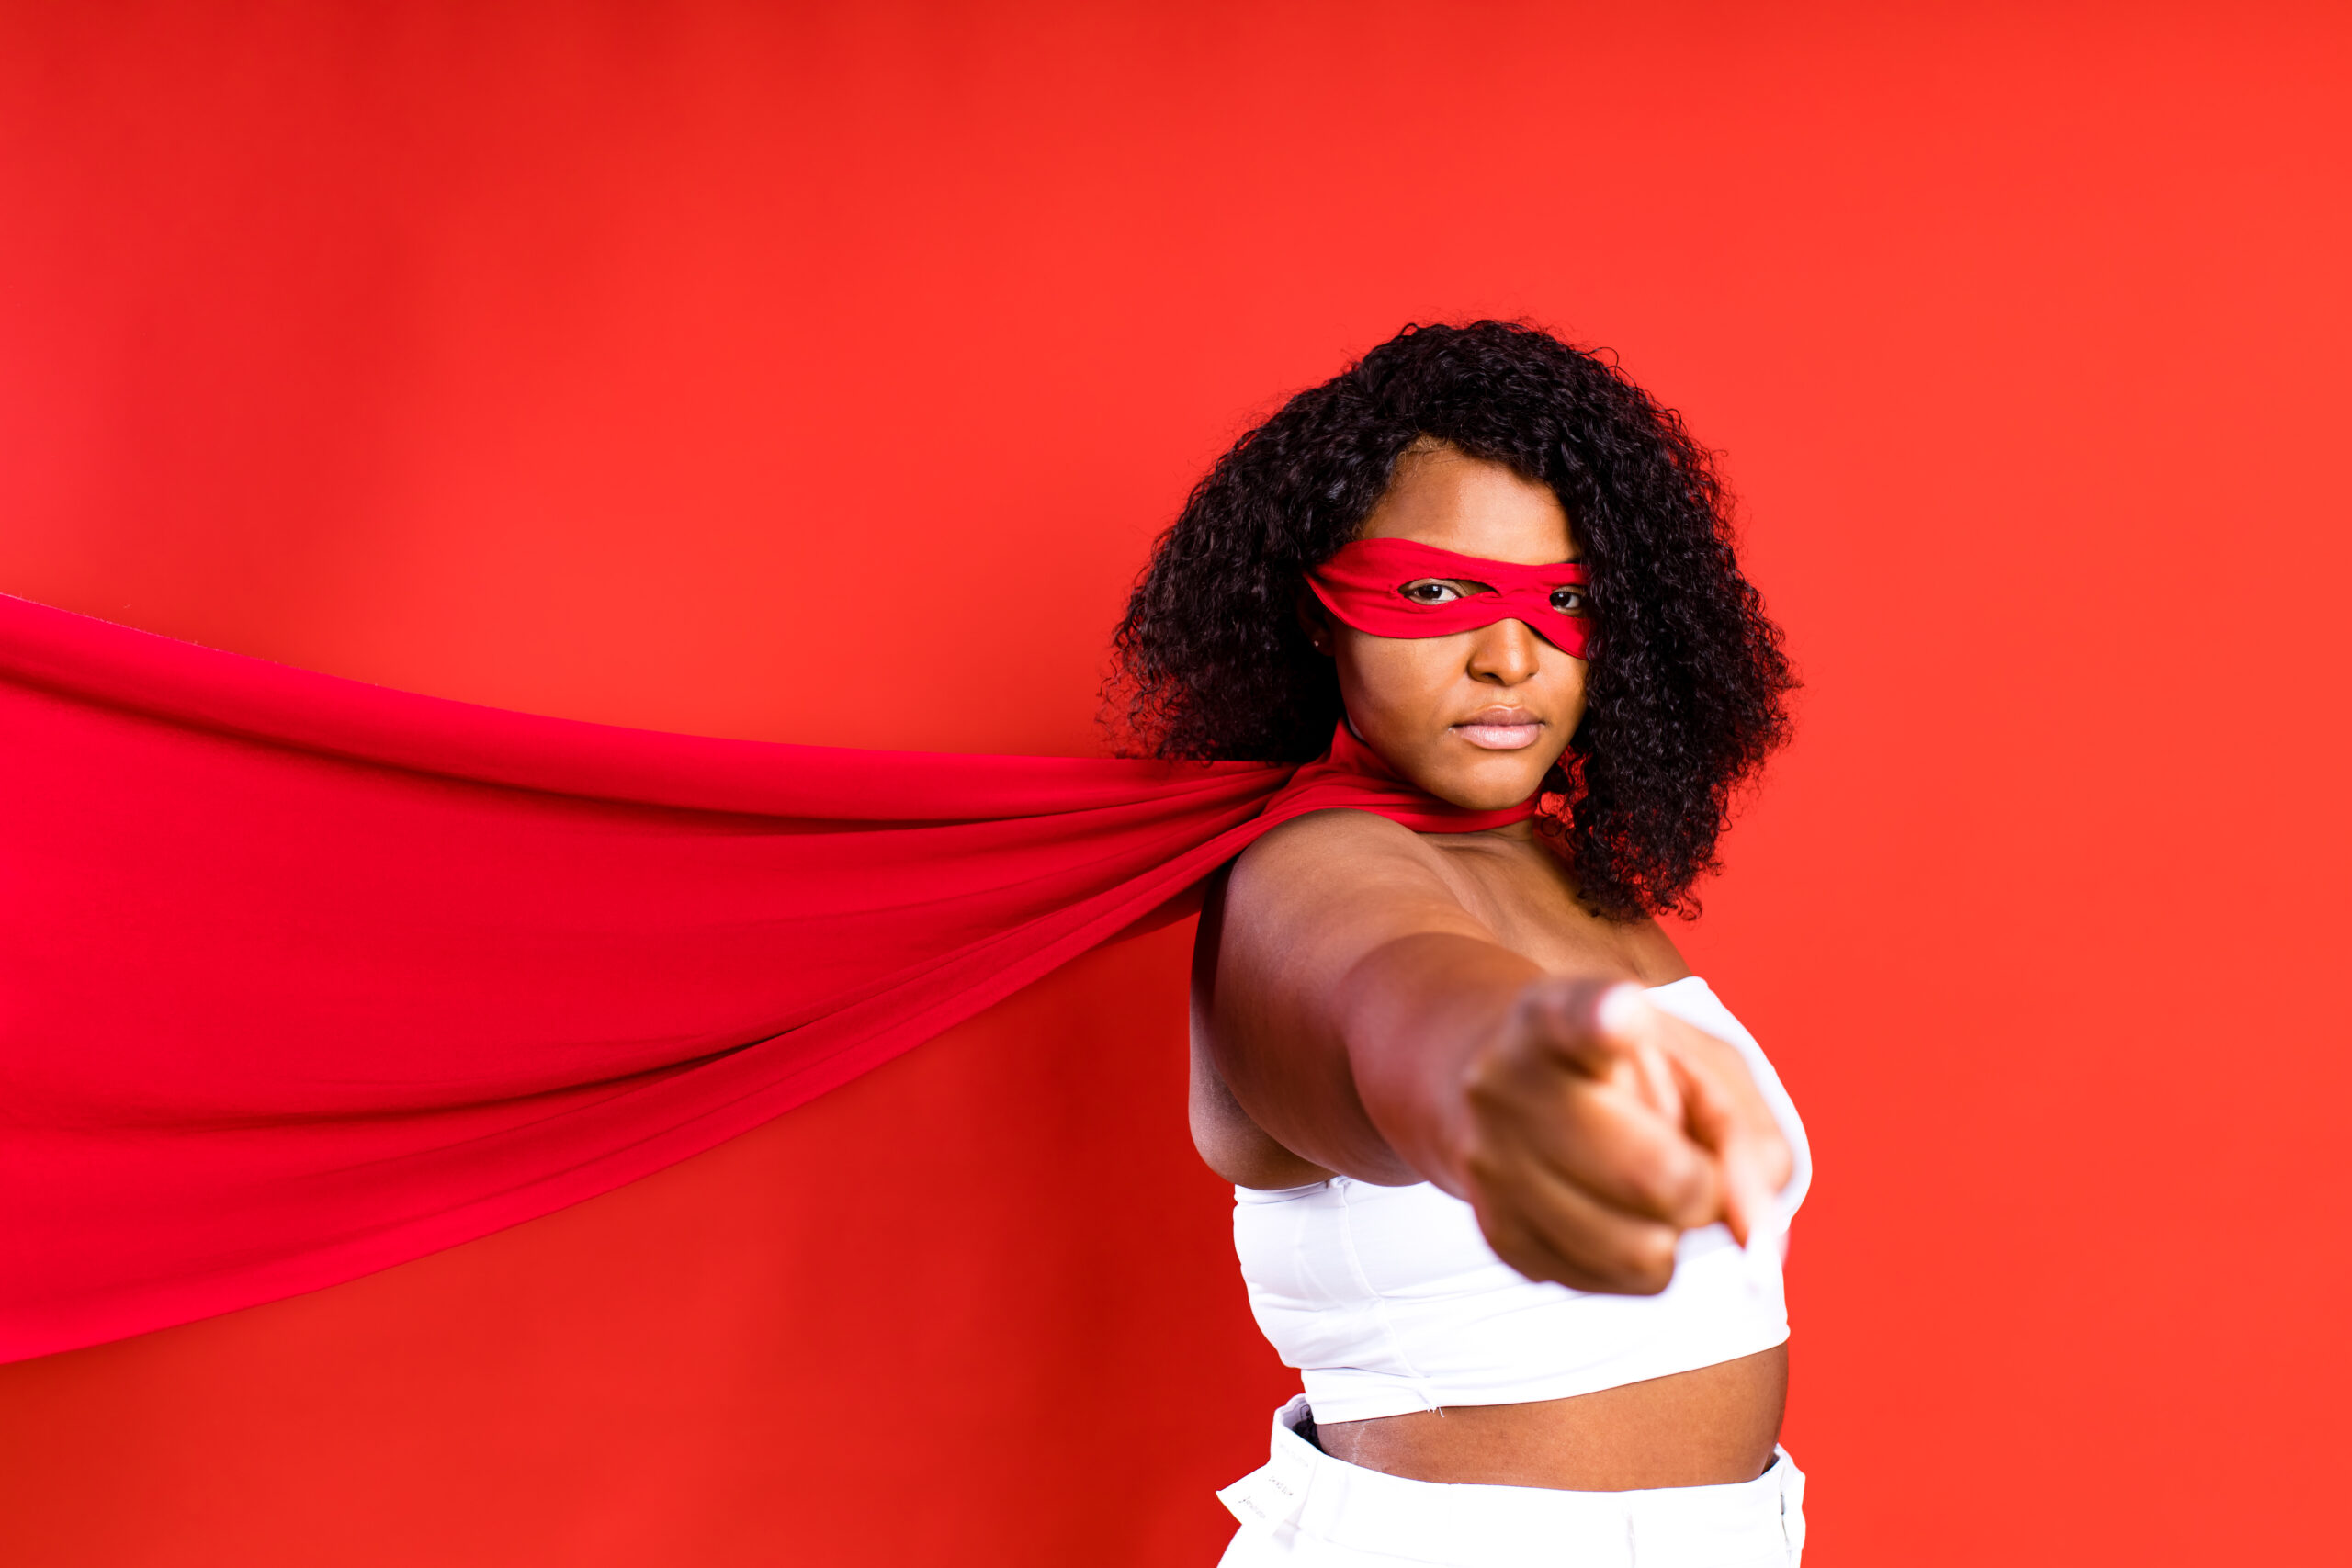 Photo of a Black woman with dark, curly hair, wearing a white top and pants and a red cape and superhero eye mask in front of a solid red background.